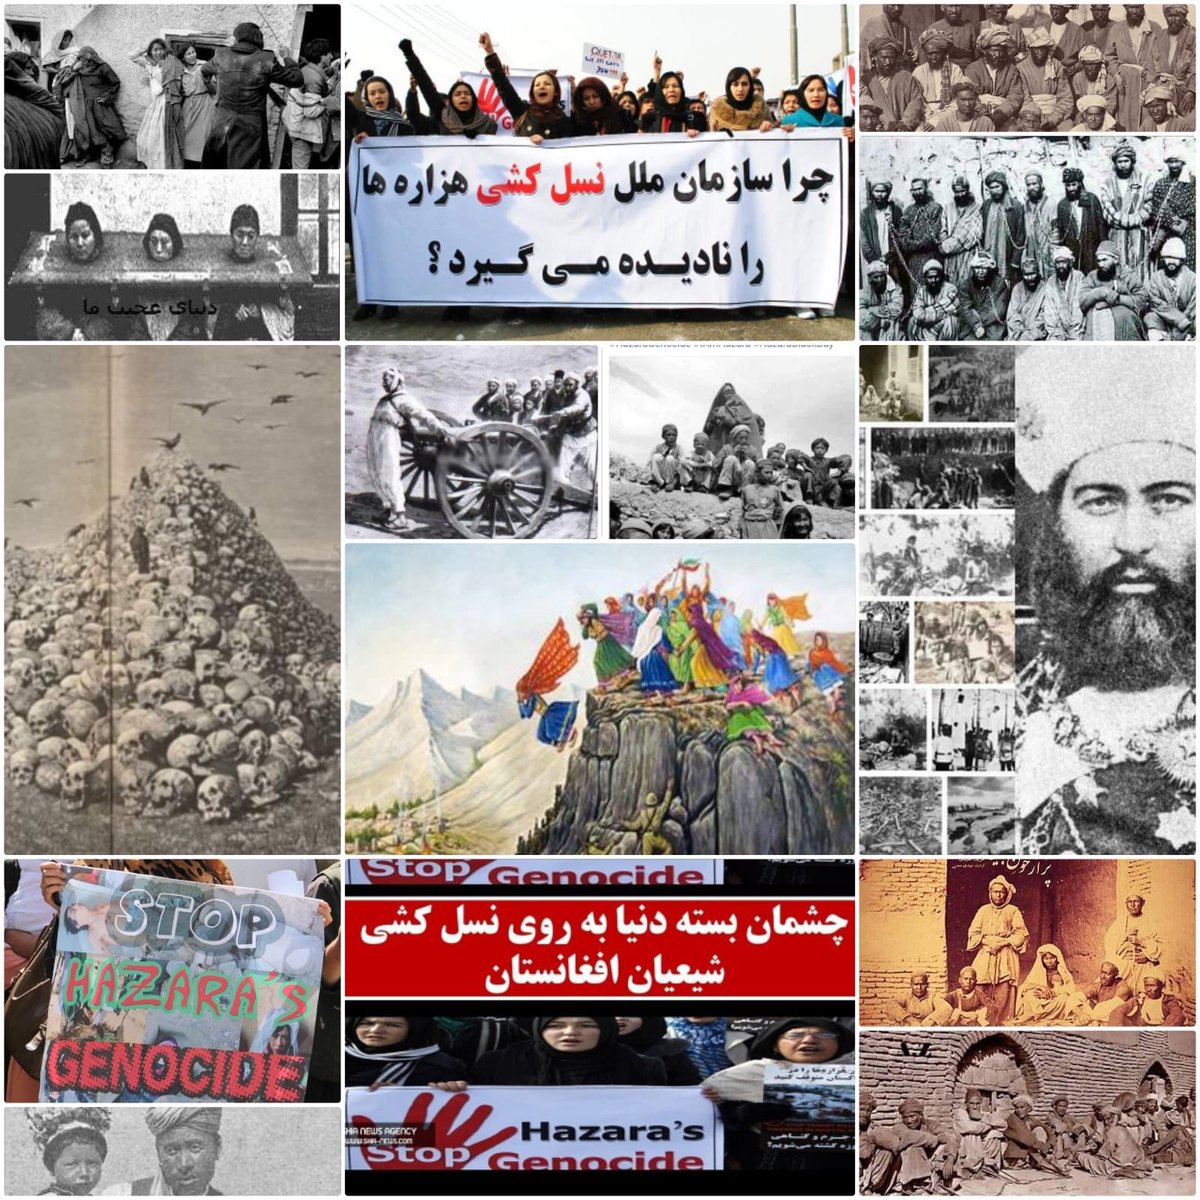 Be the voice of Hazaras in Afghanistan. Hazaras have been subjected to genocide for more than a hundred years because of their ethnicity and religion. We all want the people of the world and the international organization to recognize the genocide of Hazaras.
#StopHazaraGenocide